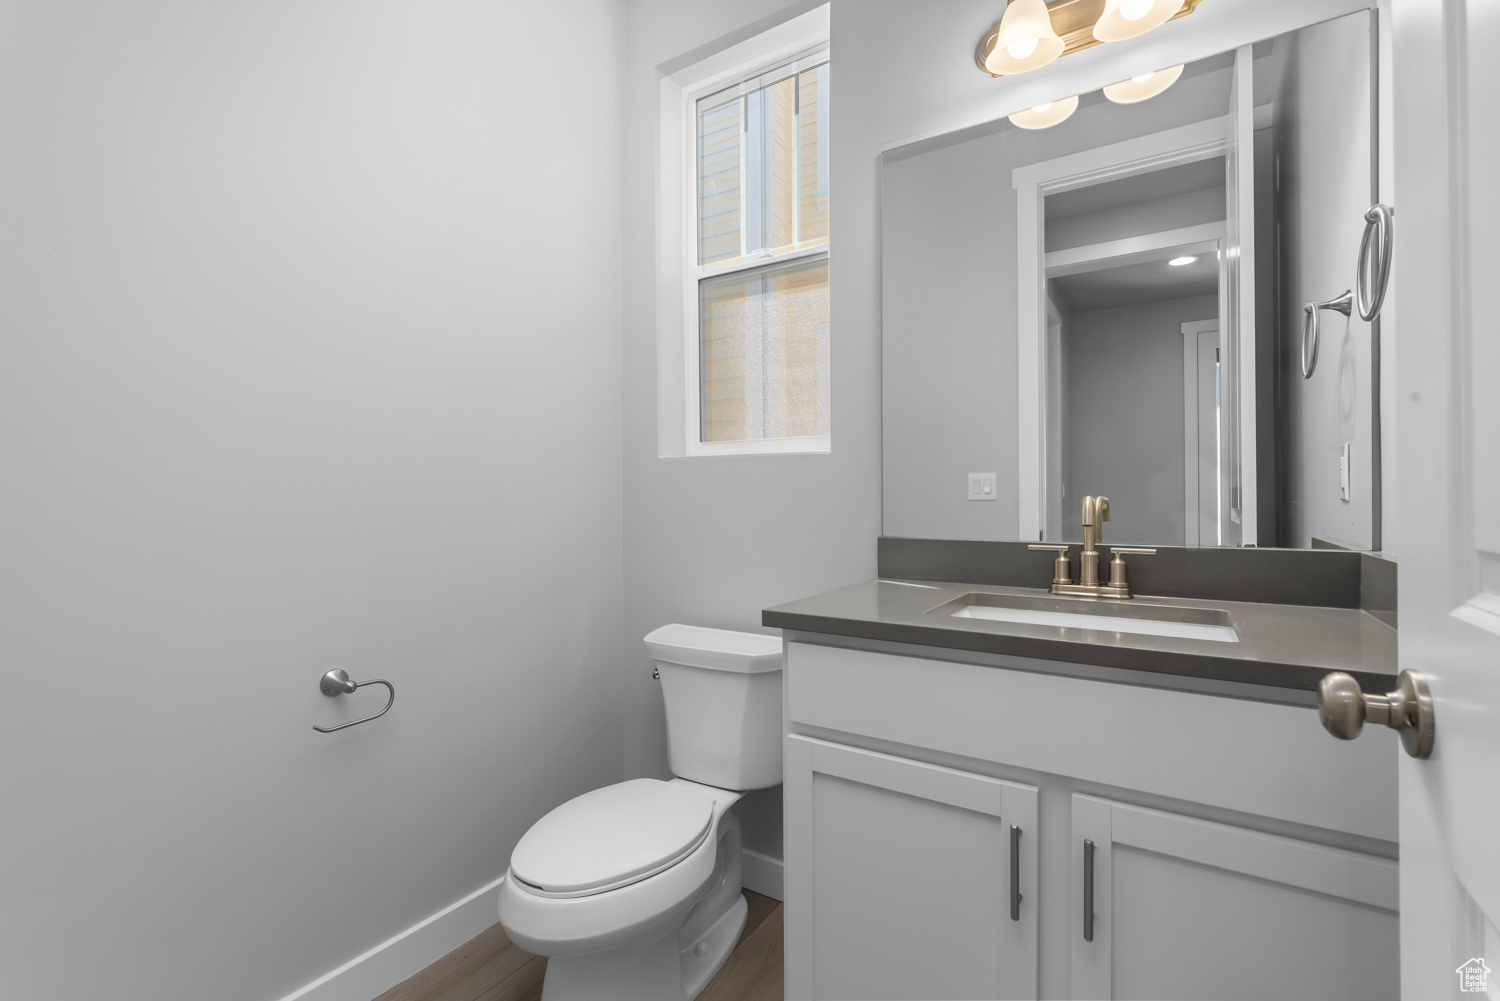 Bathroom featuring a wealth of natural light, oversized vanity, toilet, and hardwood / wood-style floors